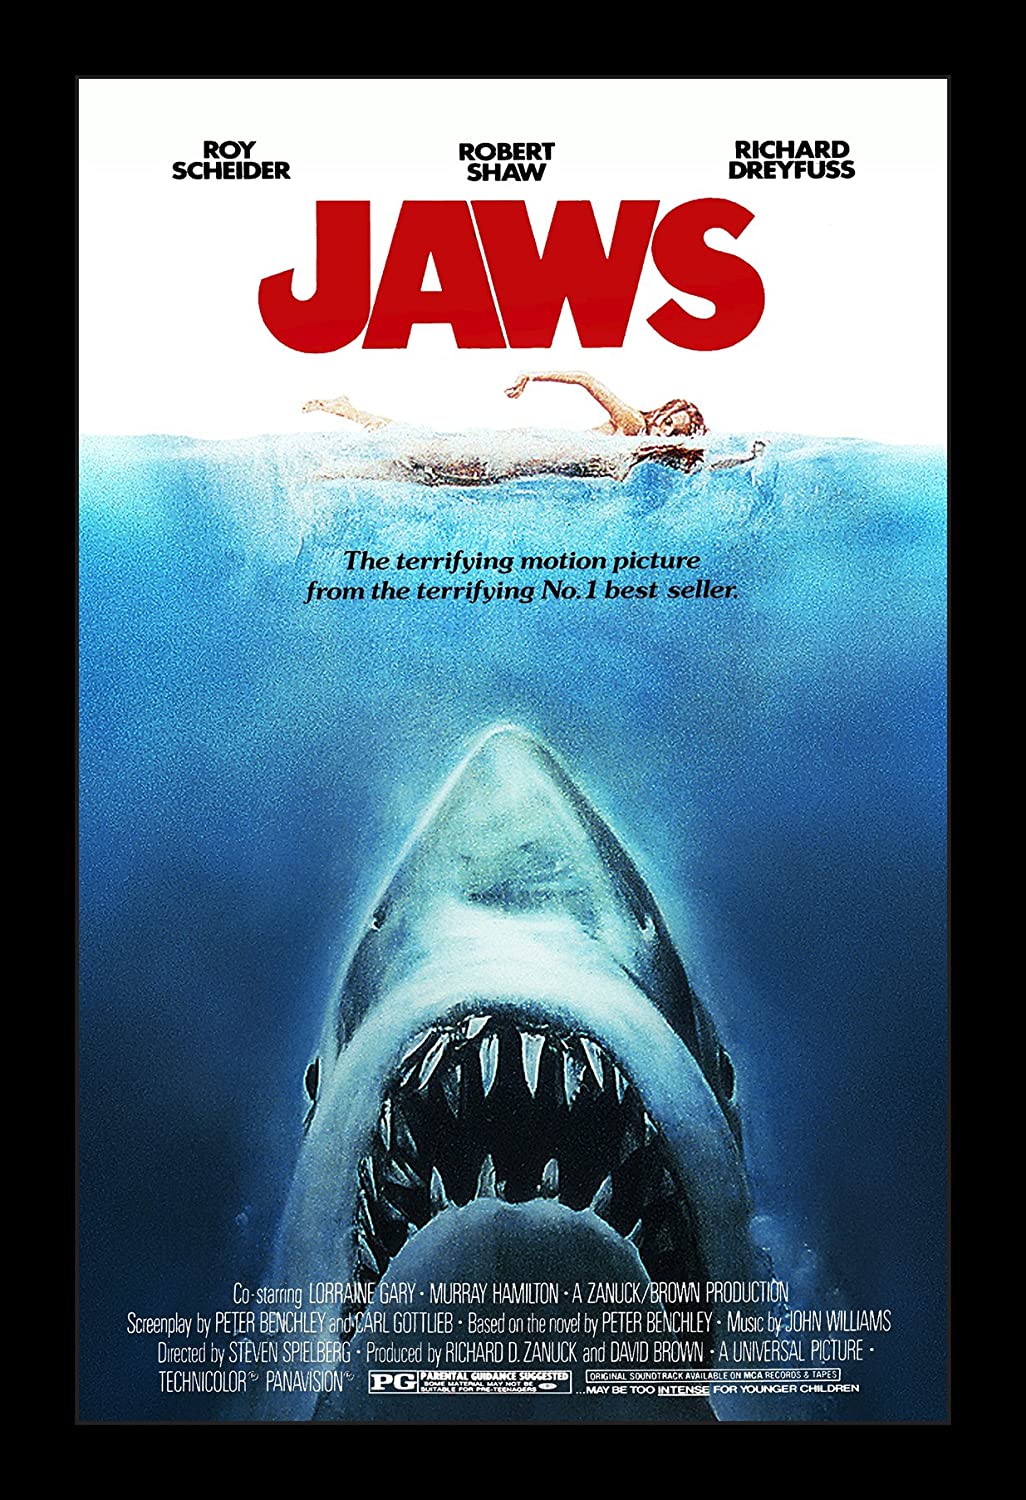 Official Jaws movie poster.  A shark emerging from the bottom of the image, towards a woman swimming at the top of the water.